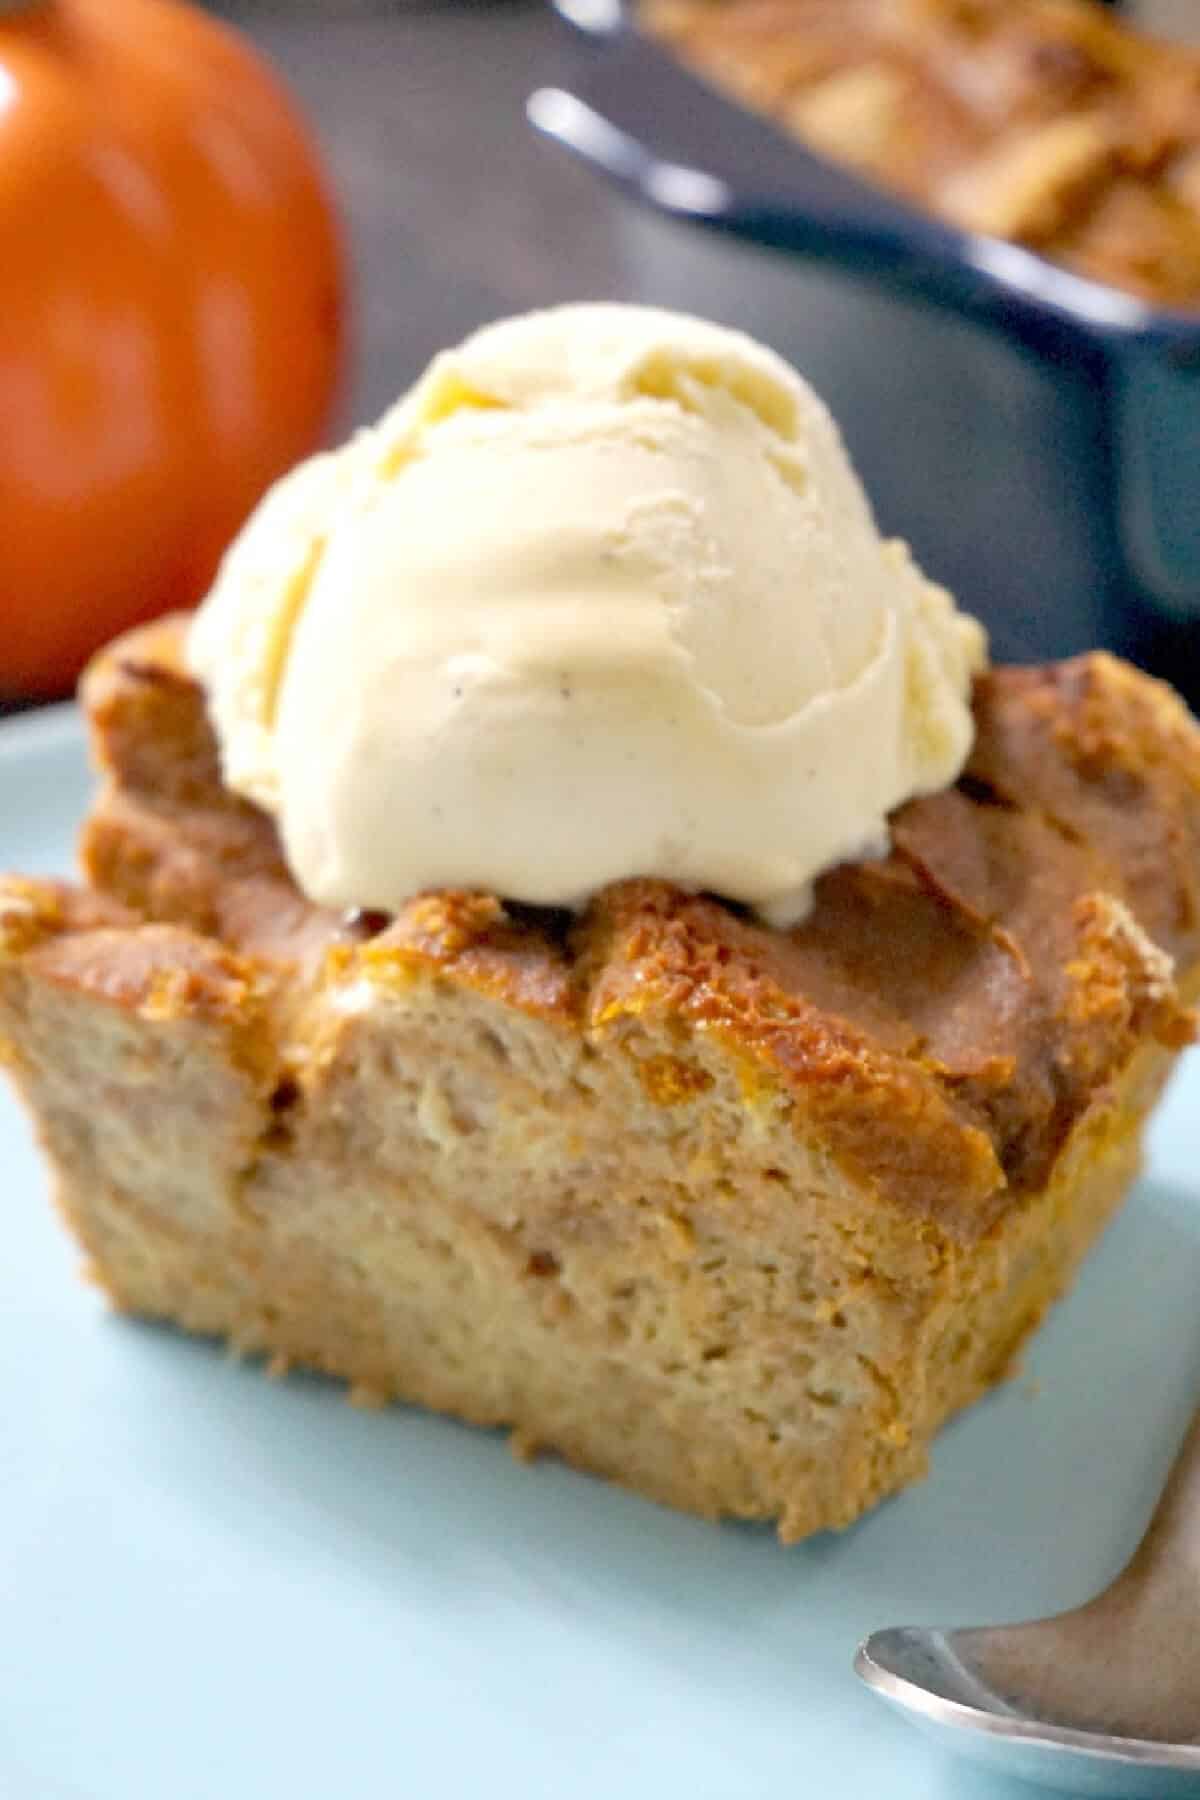 A slice of pumpkin bread pudding topped with a scoop of ice cream.